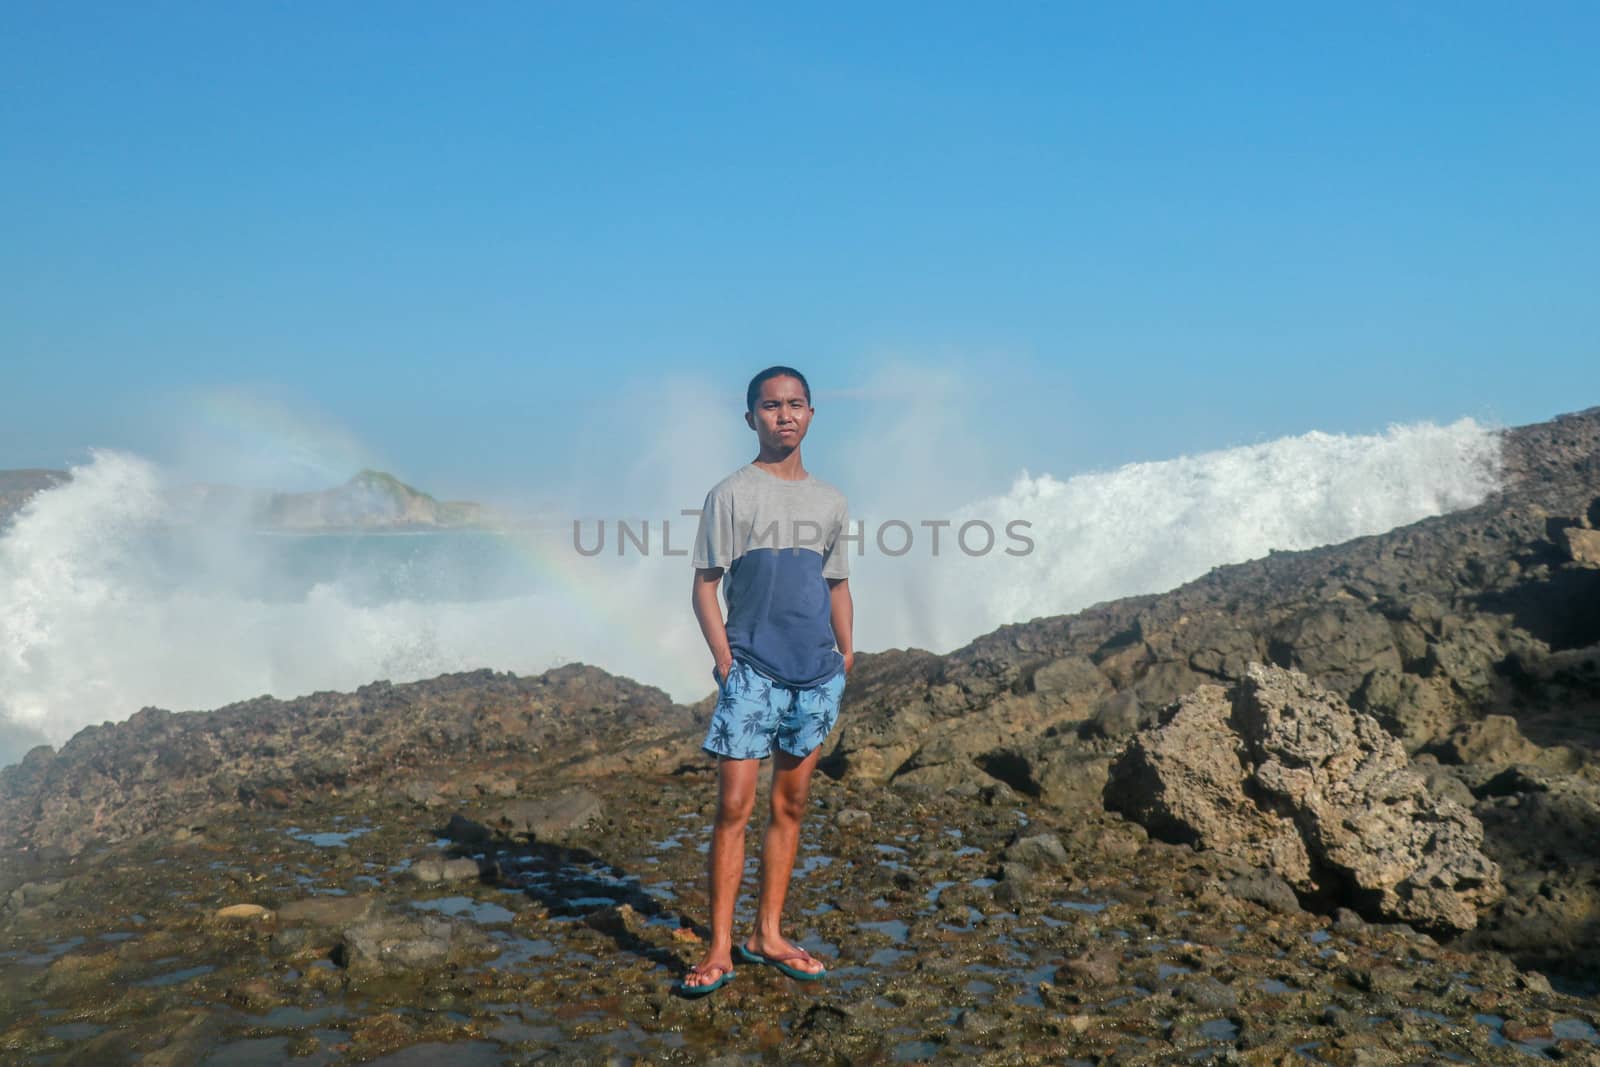 Waves hitting round rocks and splashing. A young man stands on a rocky shore and the waves crash against a cliff.